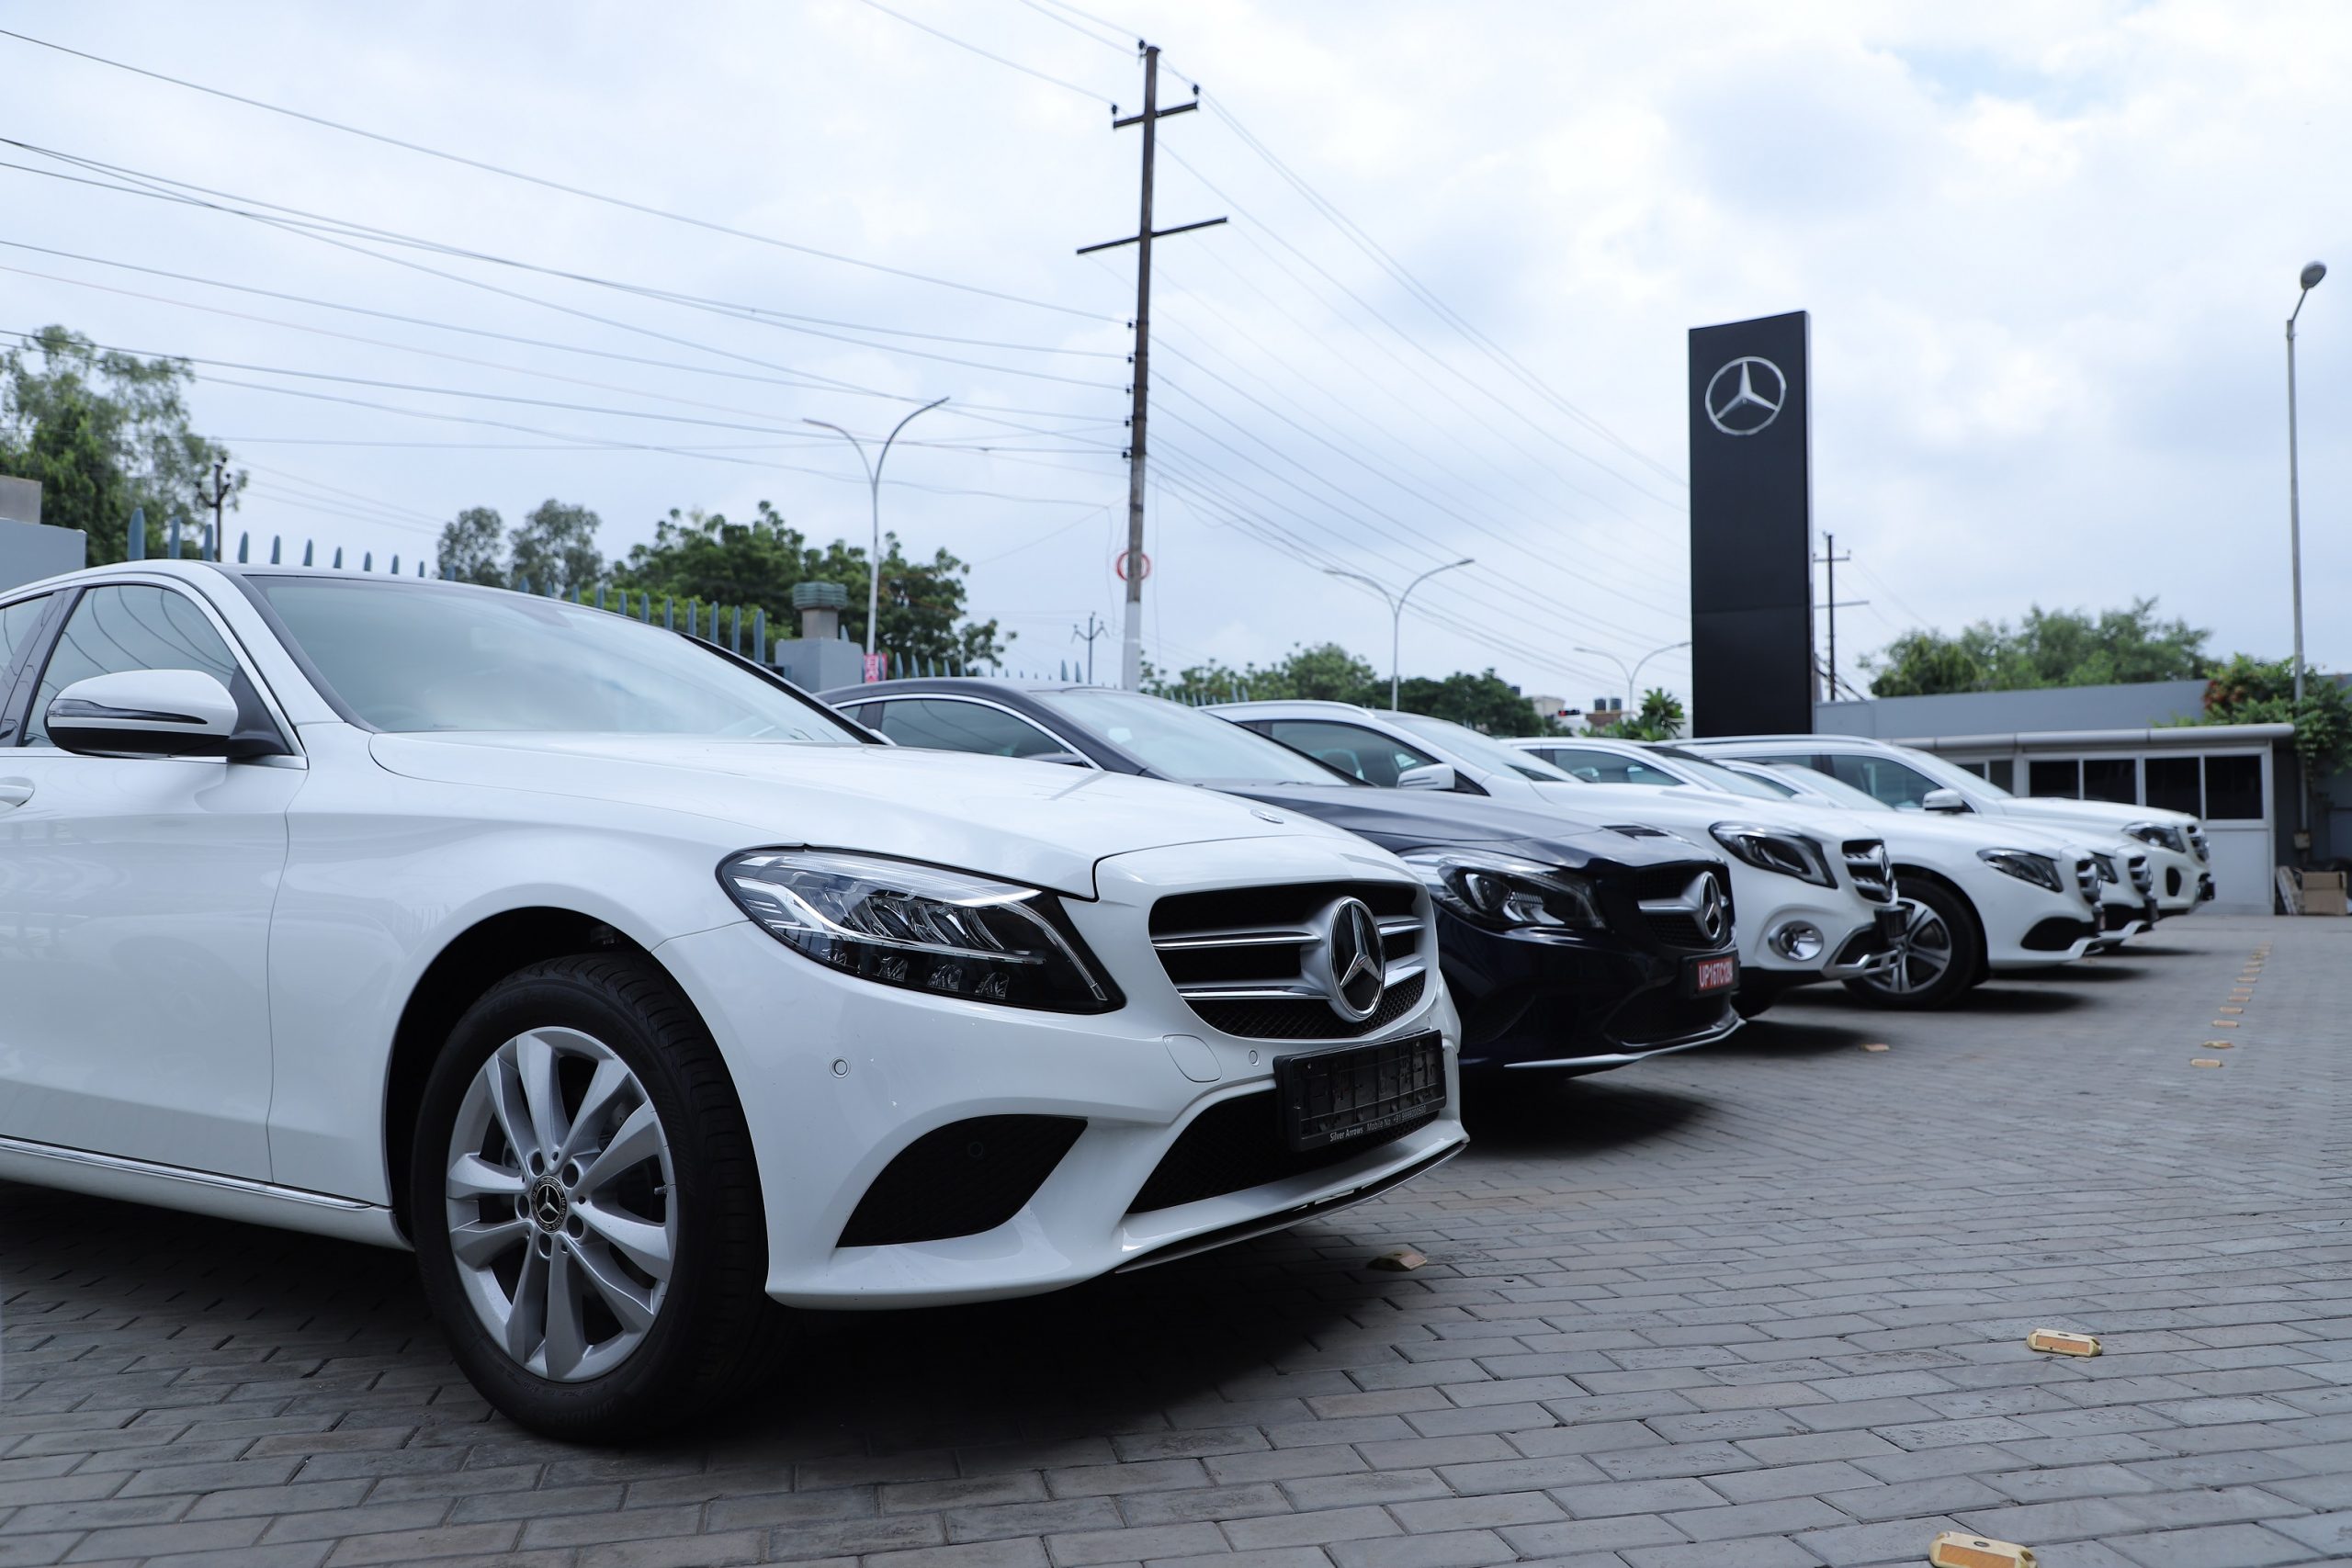 Mercedes-Benz India delivers a record 550 new cars during Navratri & Dussehra